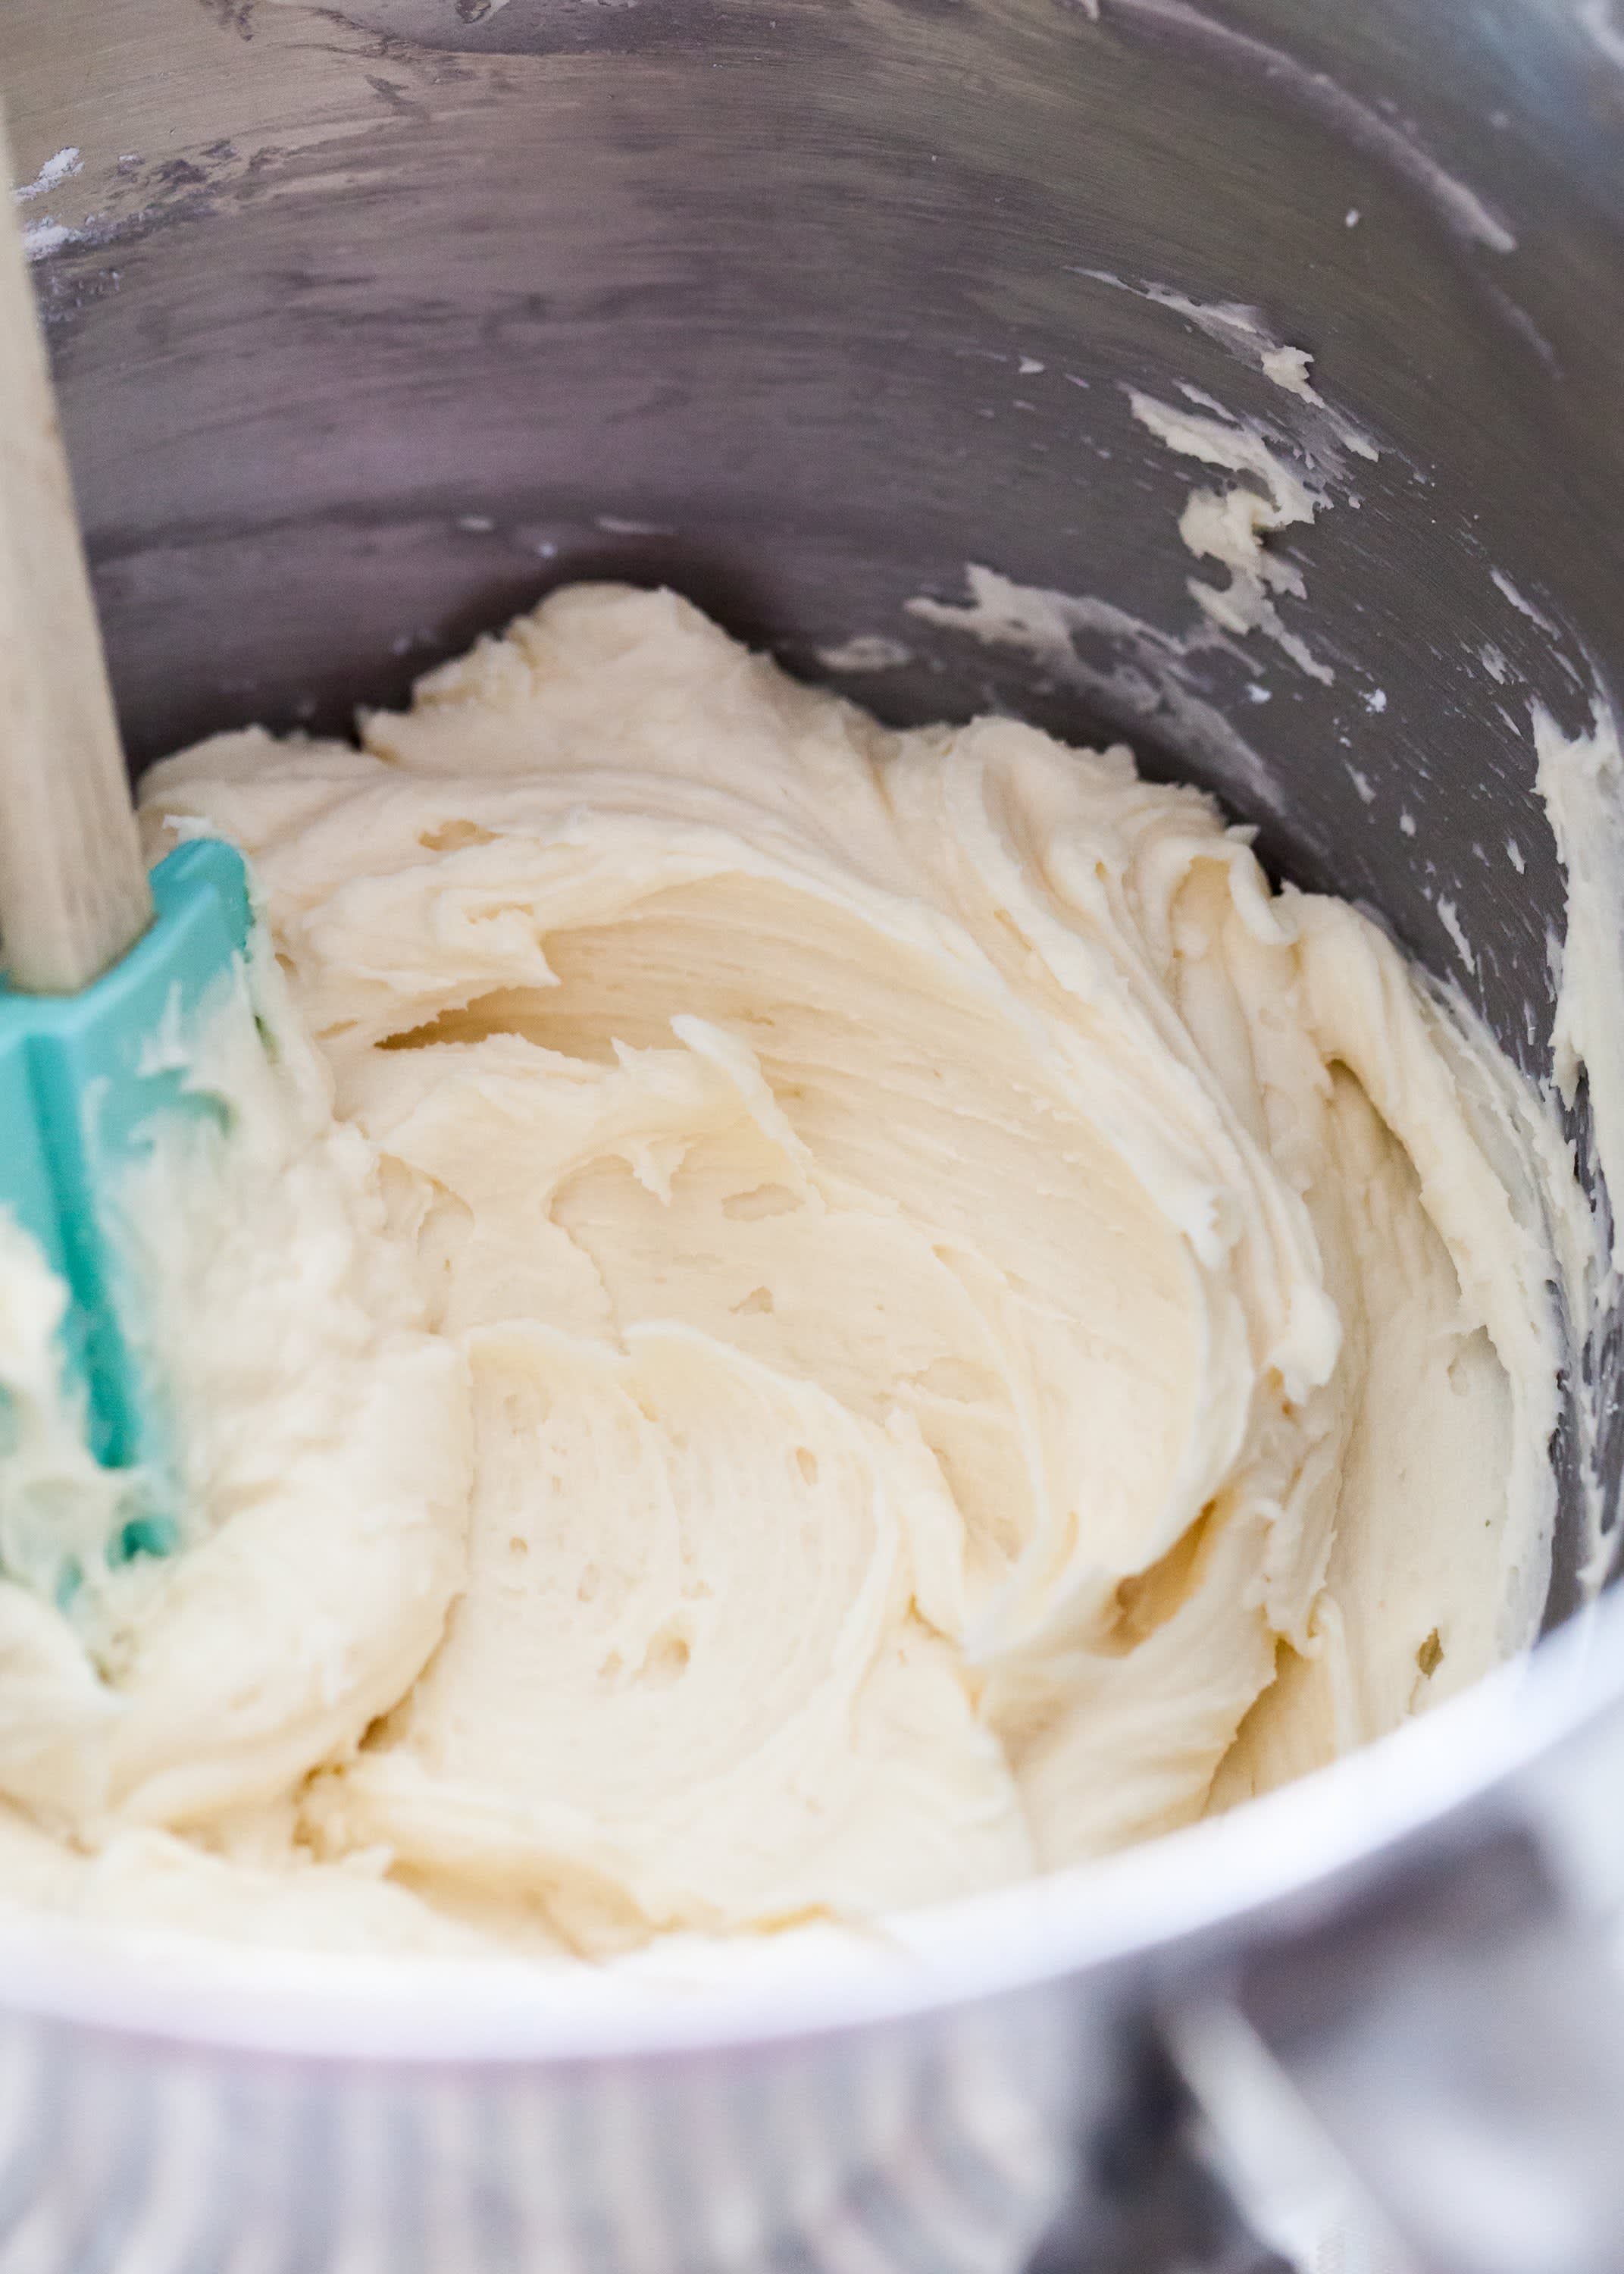 How To Make Buttercream Frosting The Easiest Method Kitchn